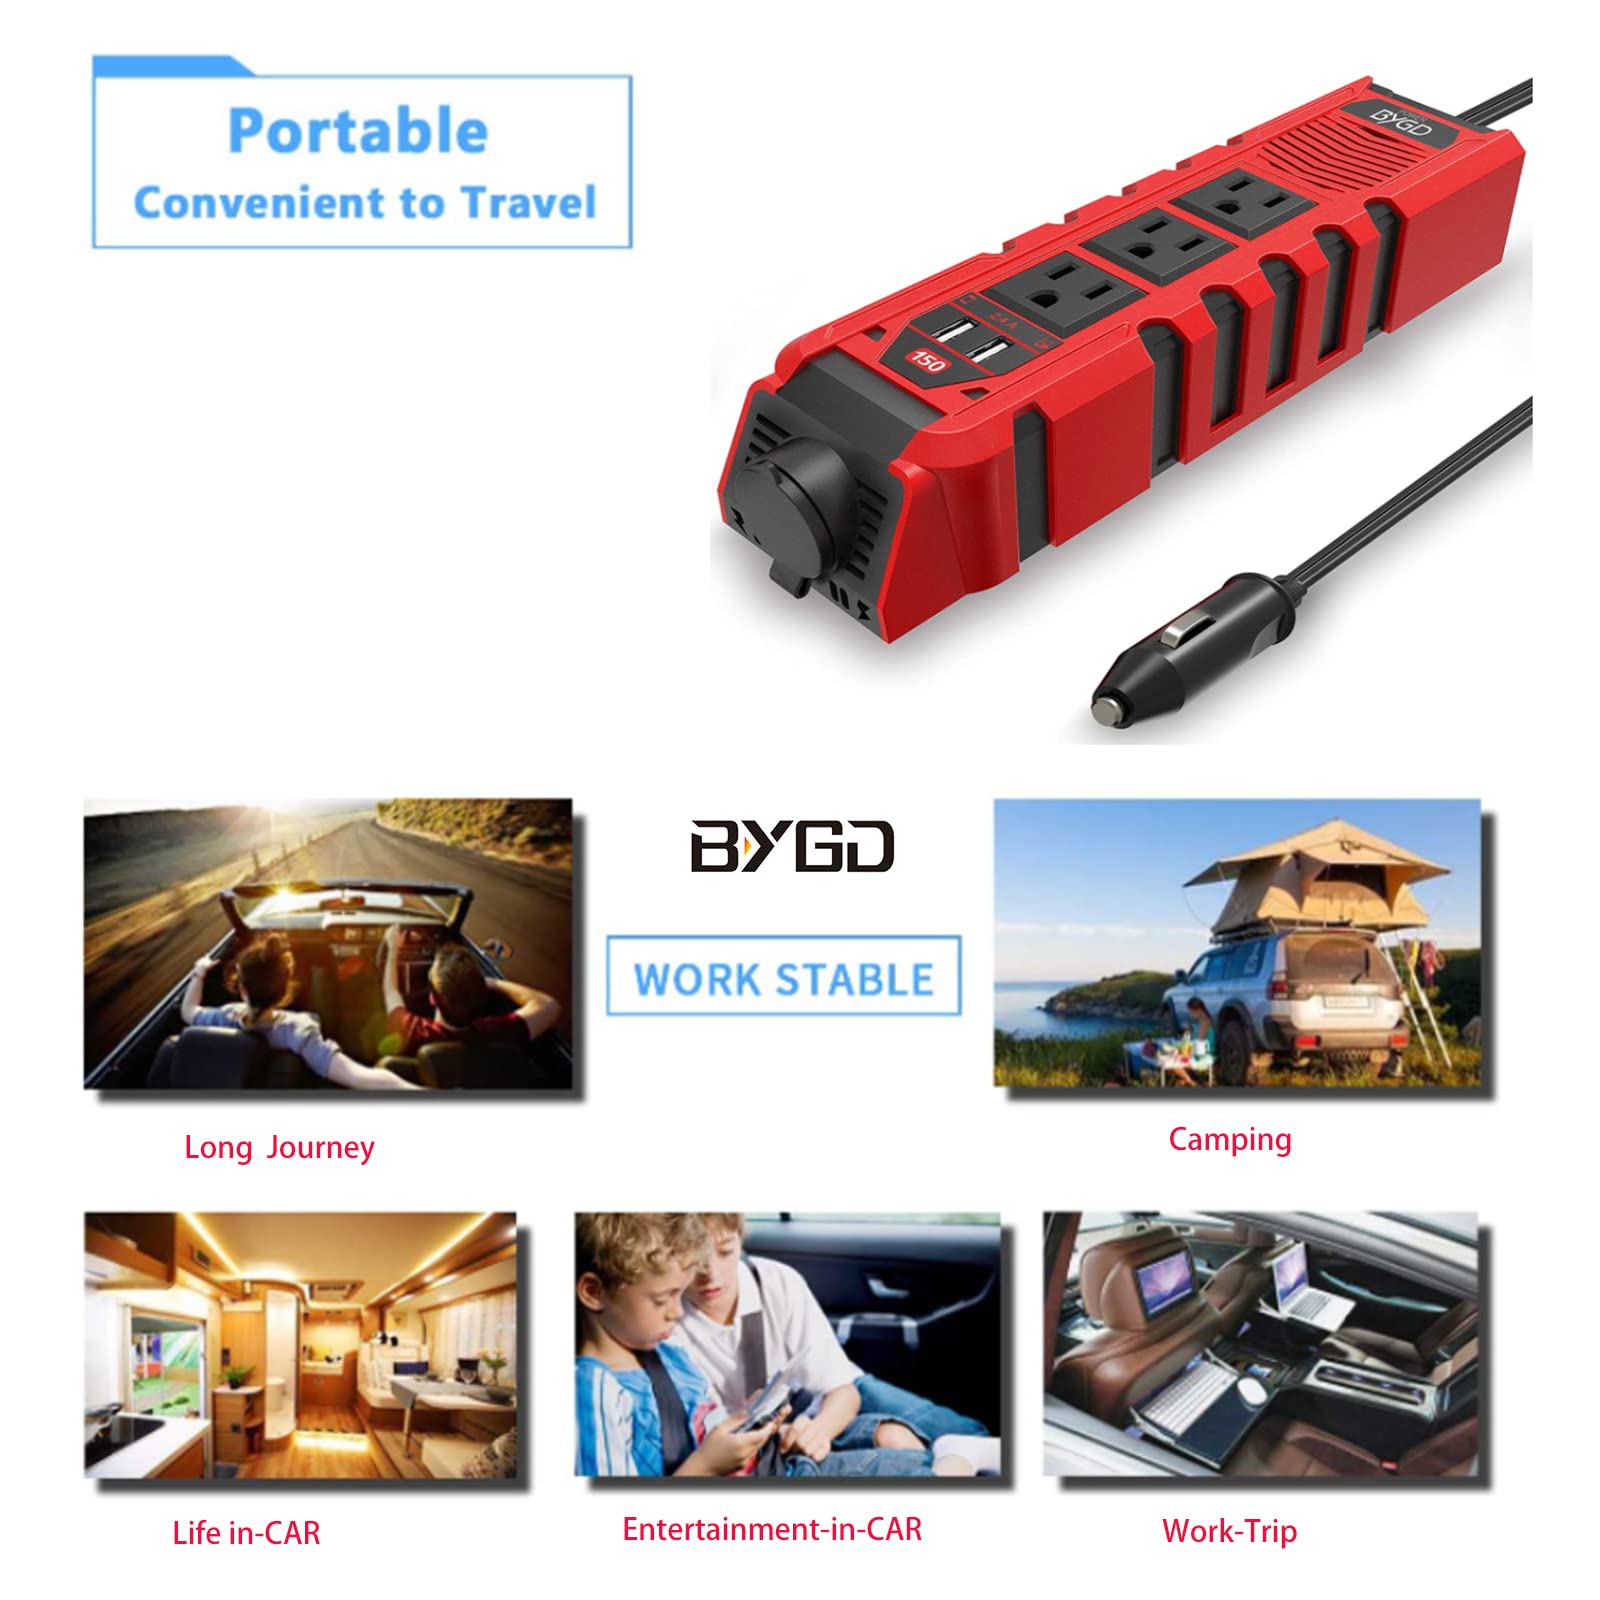 150W Car Power Inverter DC 12V to 110V AC Converter with 3 AC Outlets 2 Quick Charger 4.8A Dual USB Ports Cigarette Lighter Socket Charger Adapter